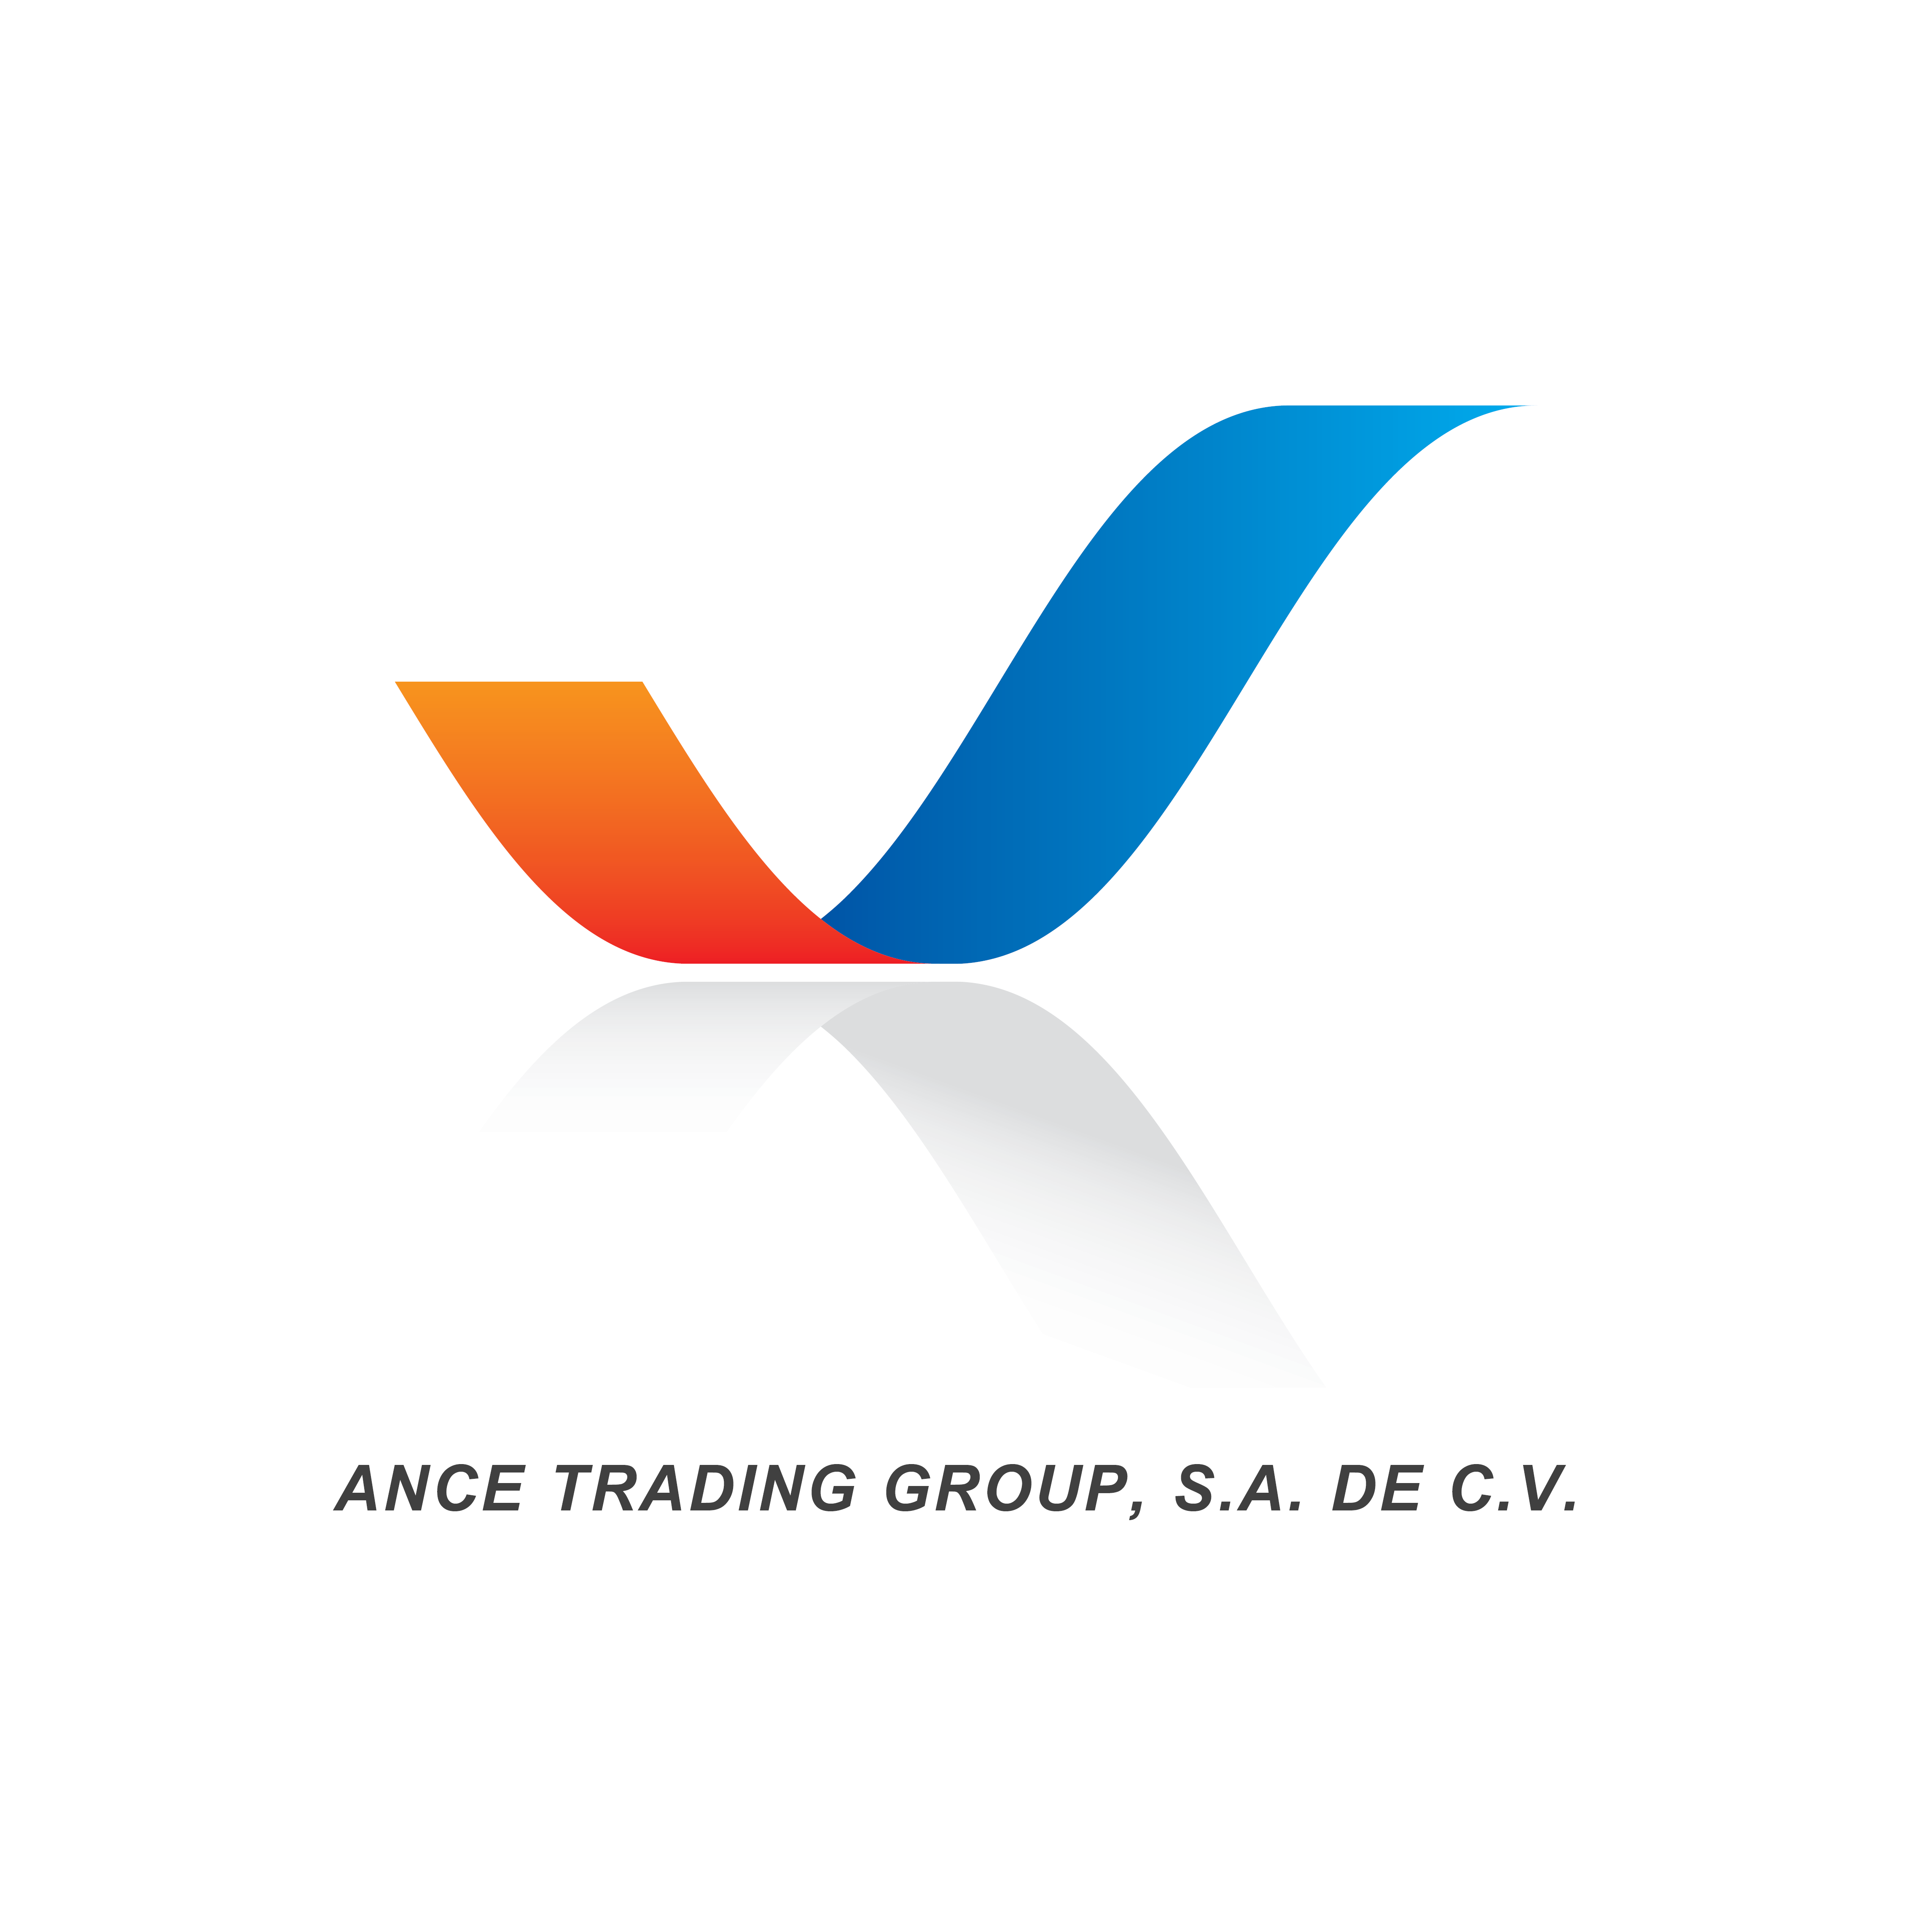 ANCE TRADING